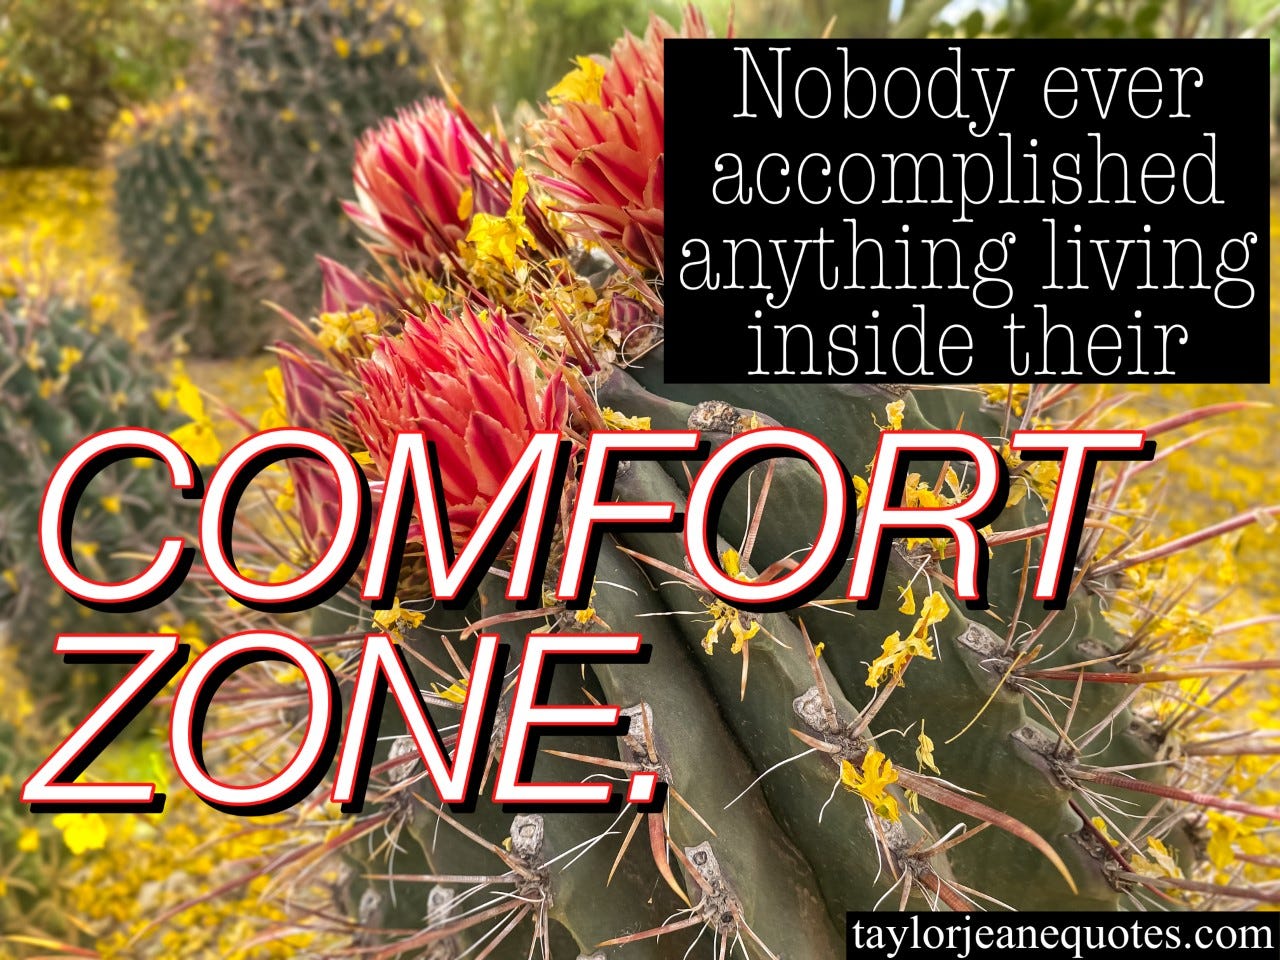 taylor jeane quotes, taylor jeane, taylor wilson, quote of the day email subscription free, daily quotes for motivation, inspirational quotes, motivational quotes, comfort zone quotes, out of your comfort zone quotes, push yourself quotes, accomplishment quotes, goal quotes, cactus with coral flowers, life quotes